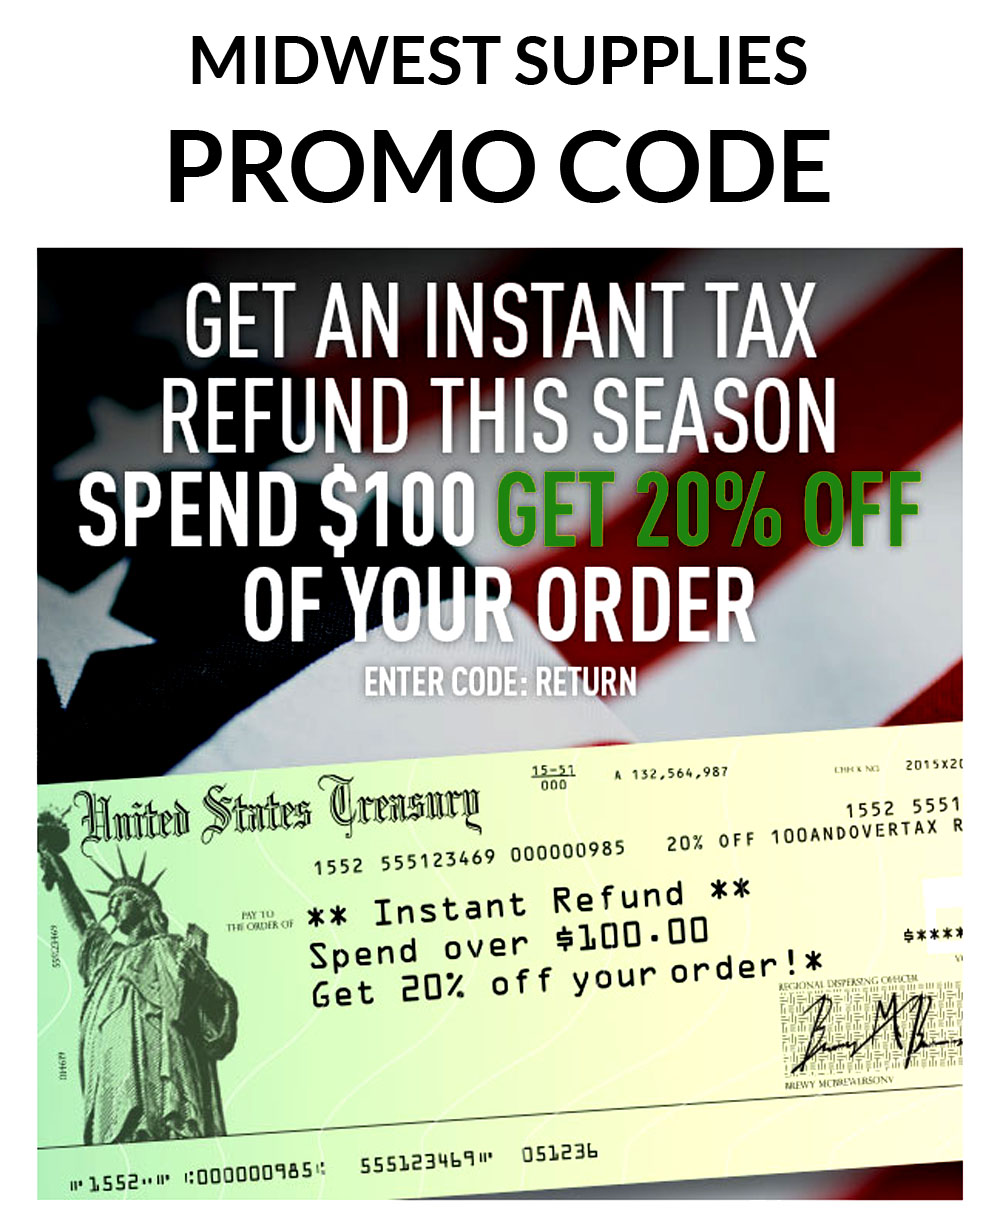  Coupon Code For Spend $100 Get 20% Off with this Midwest Supplies Coupon Code Coupon Code